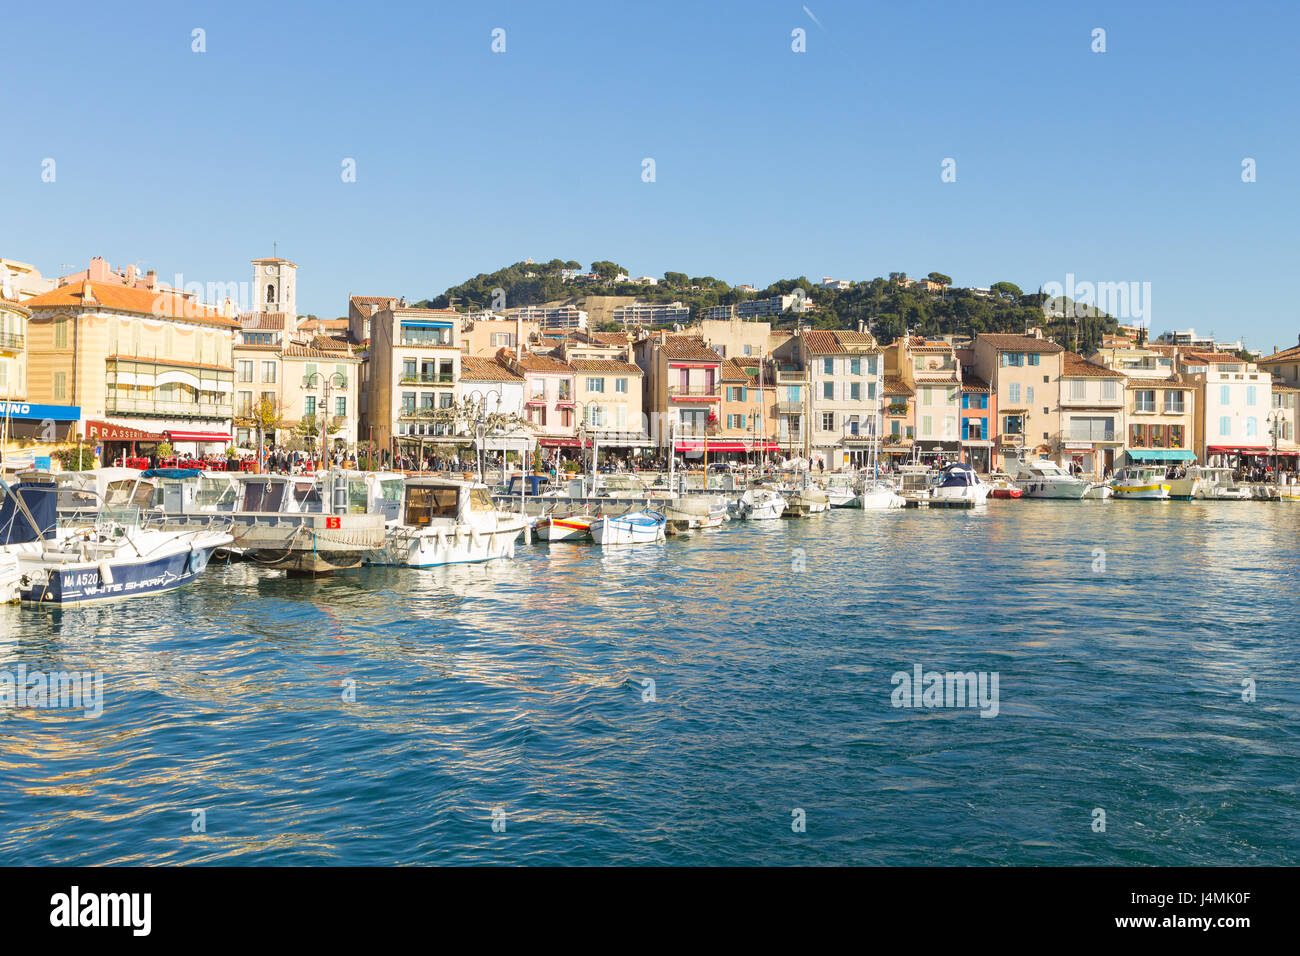 Colorful traditional houses on the promenade in the port of Cassis town ...